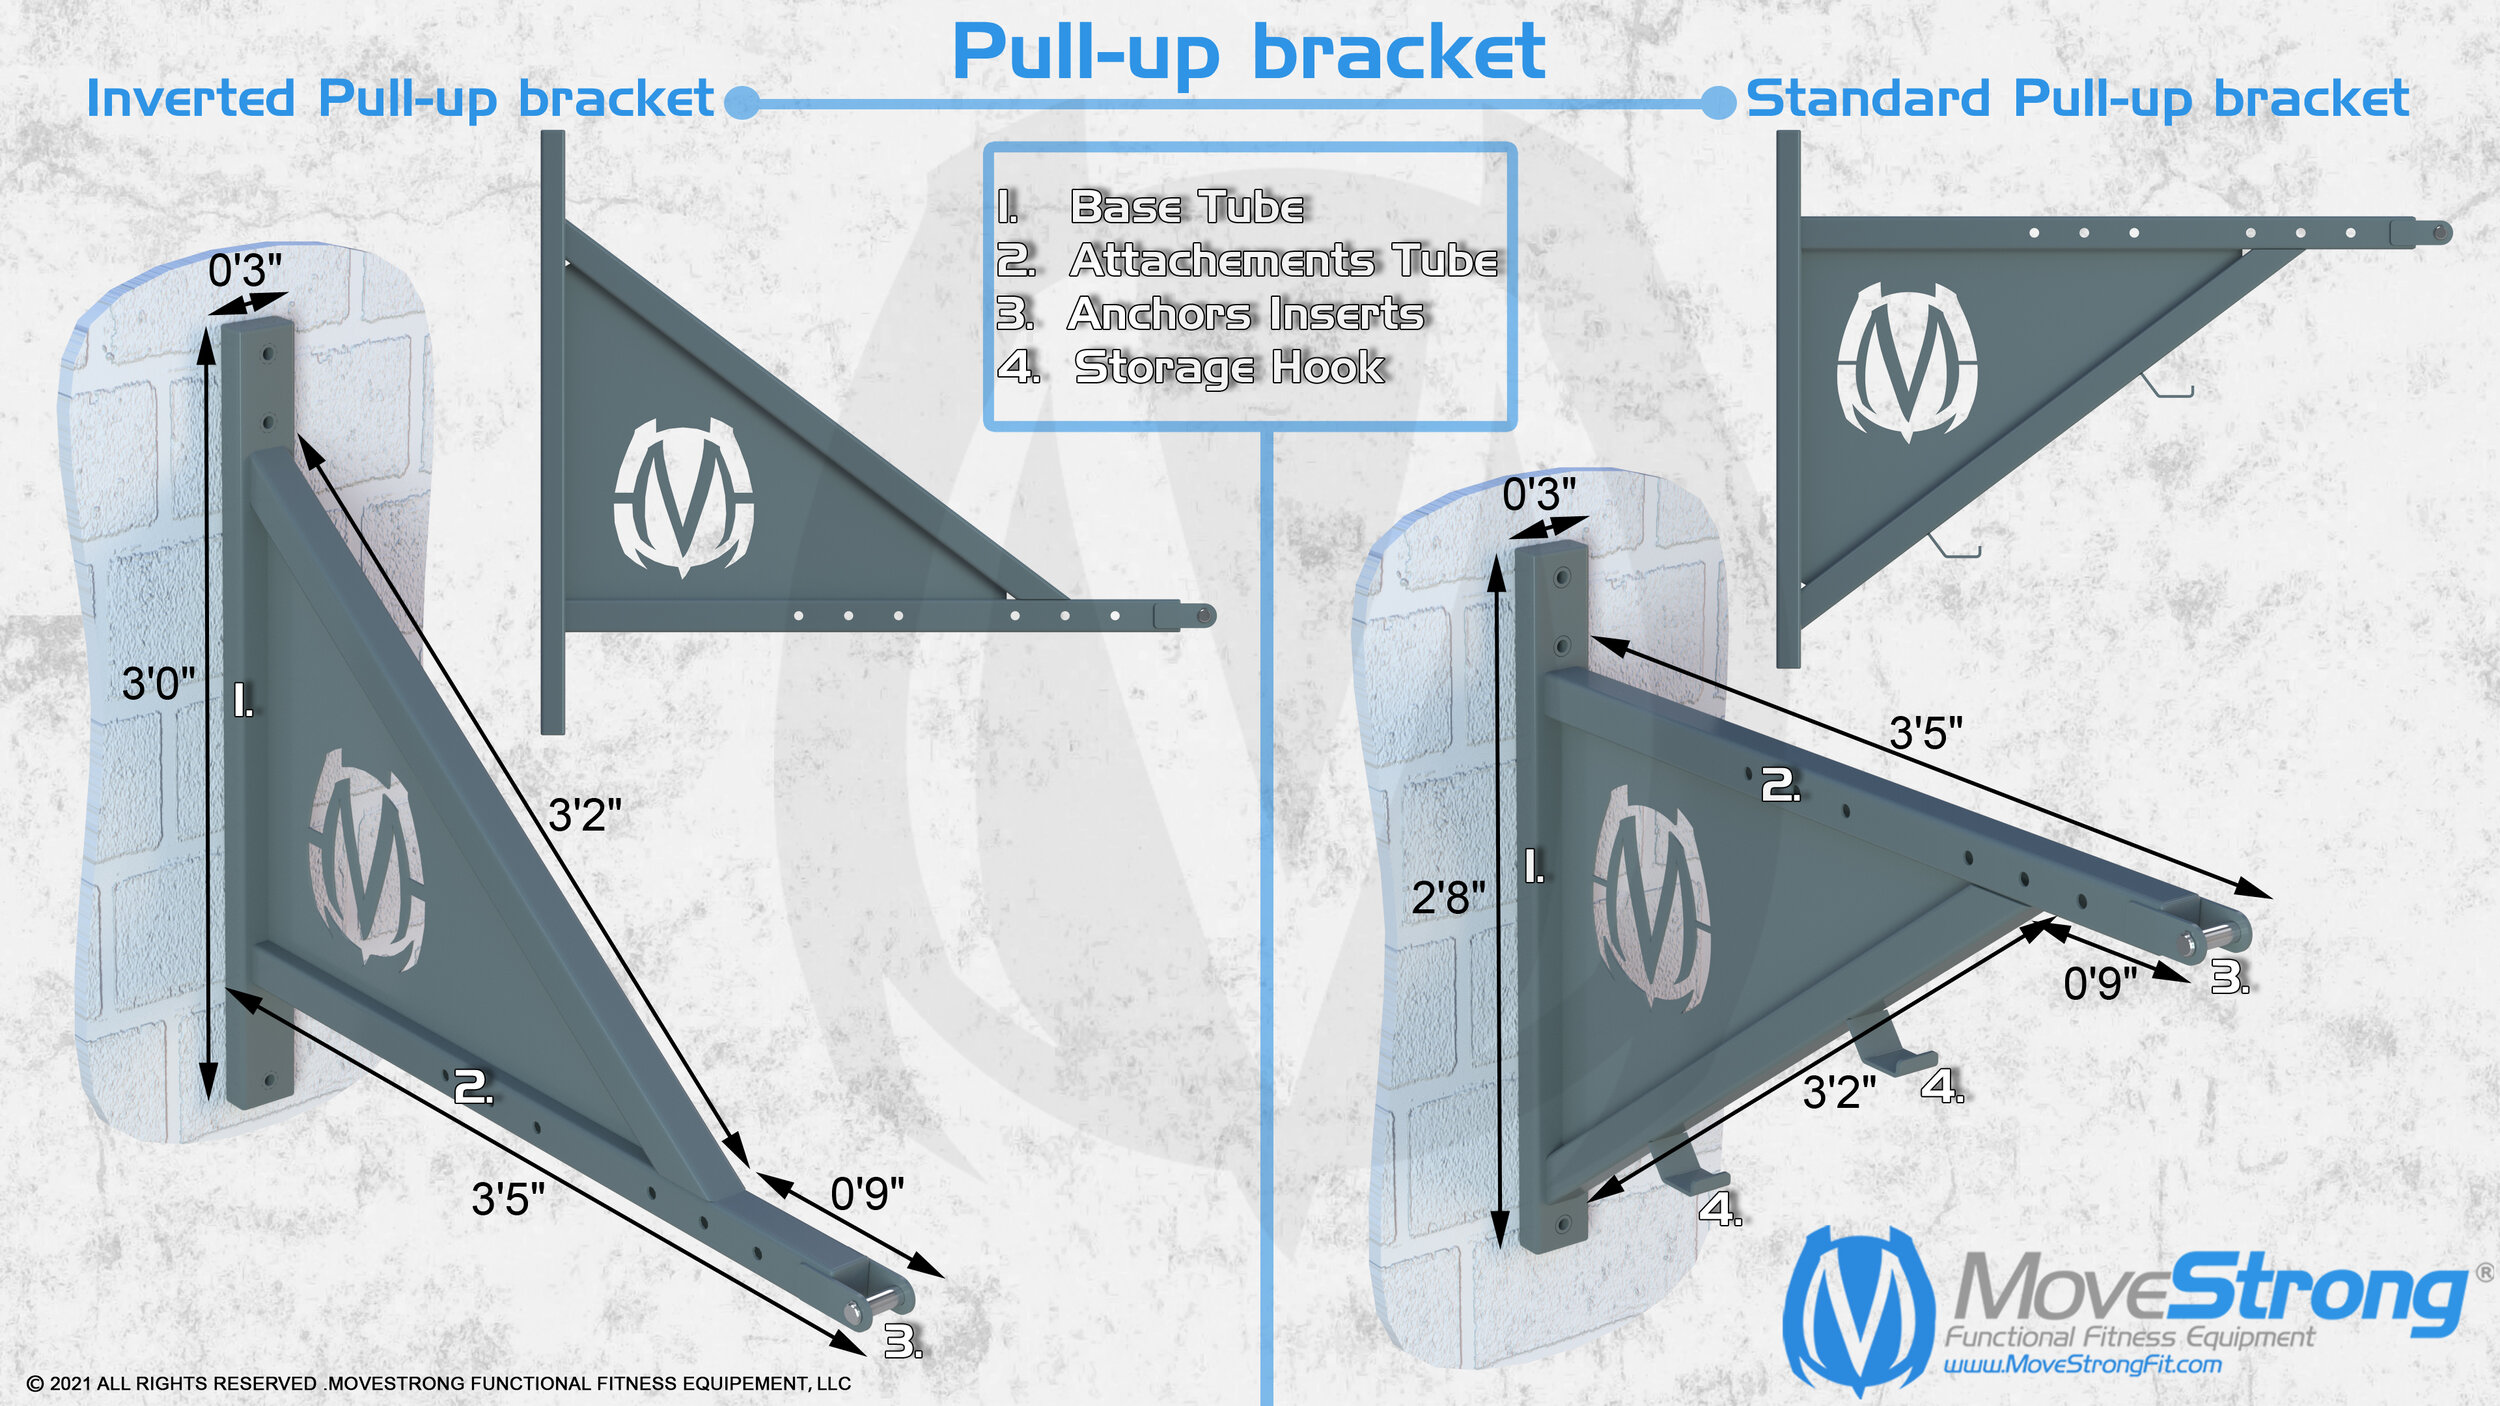 MoveStrong Pull-up Bracket System